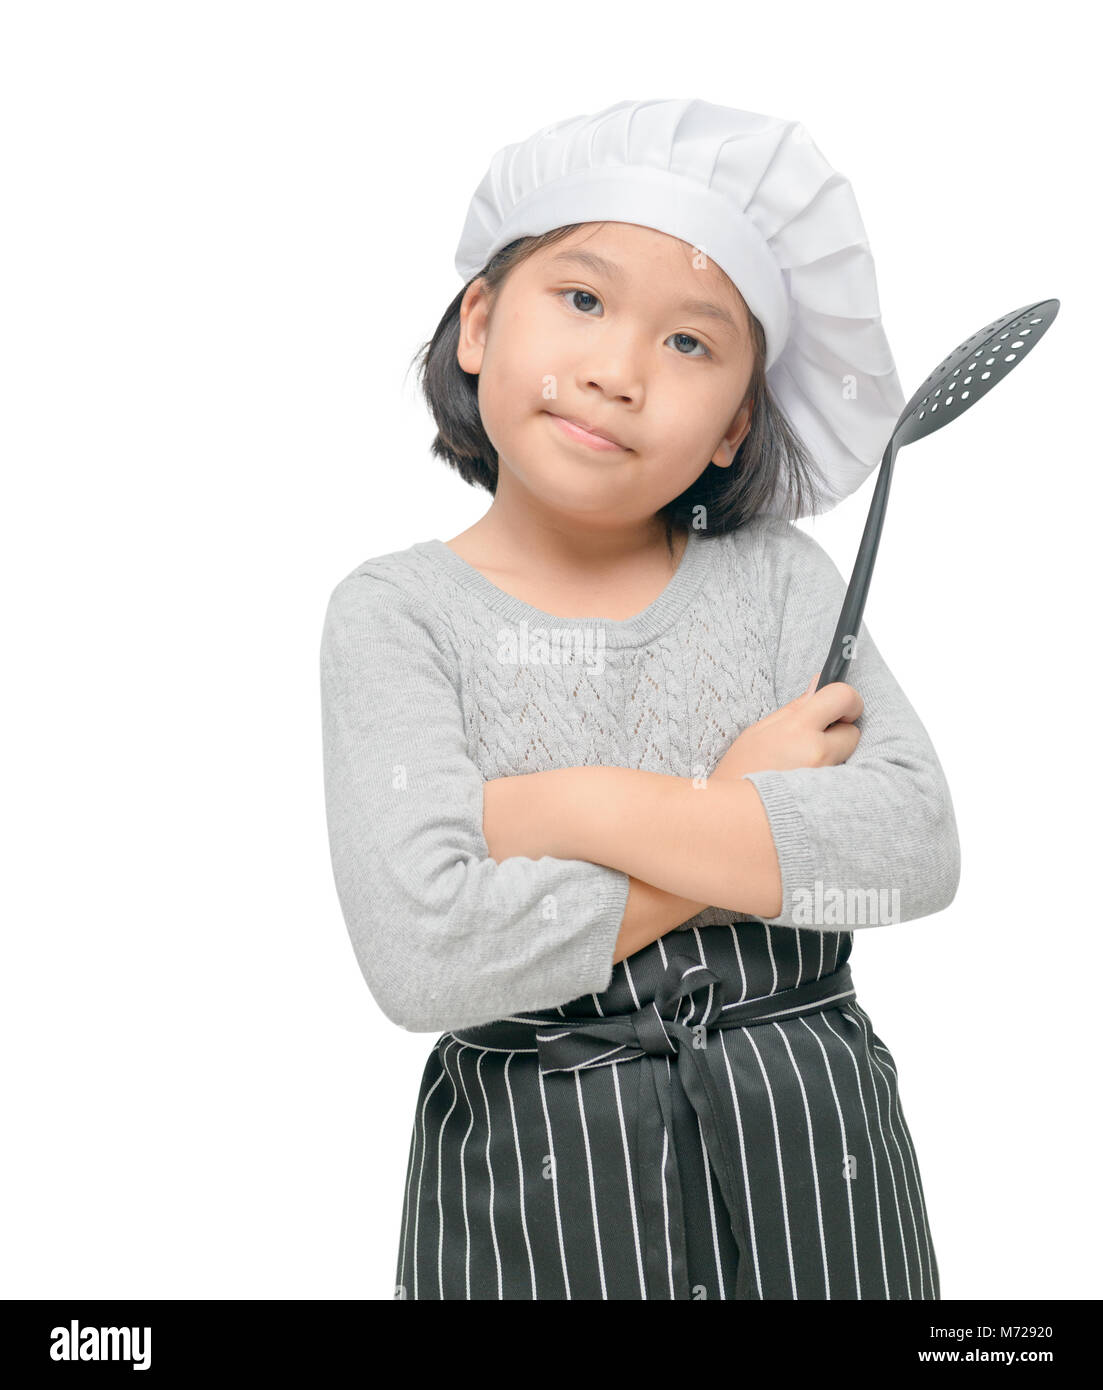 Portrait of cute girl chef hold utensils cooking with cook hat and apron stand and smile isolated on white background Stock Photo